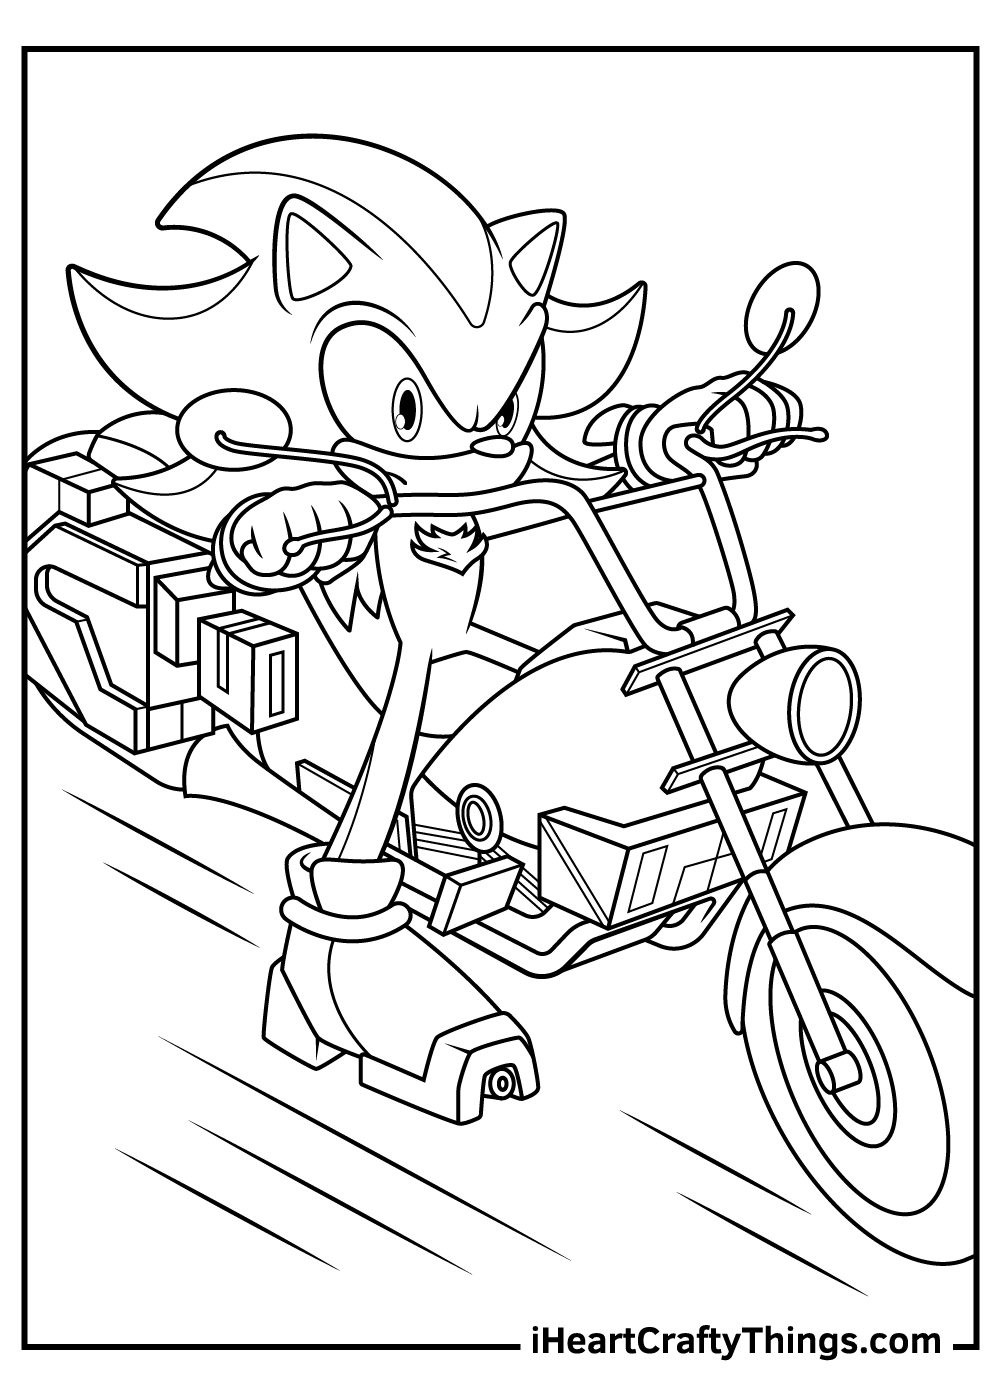 Shadow the hedgehog coloring pages updated